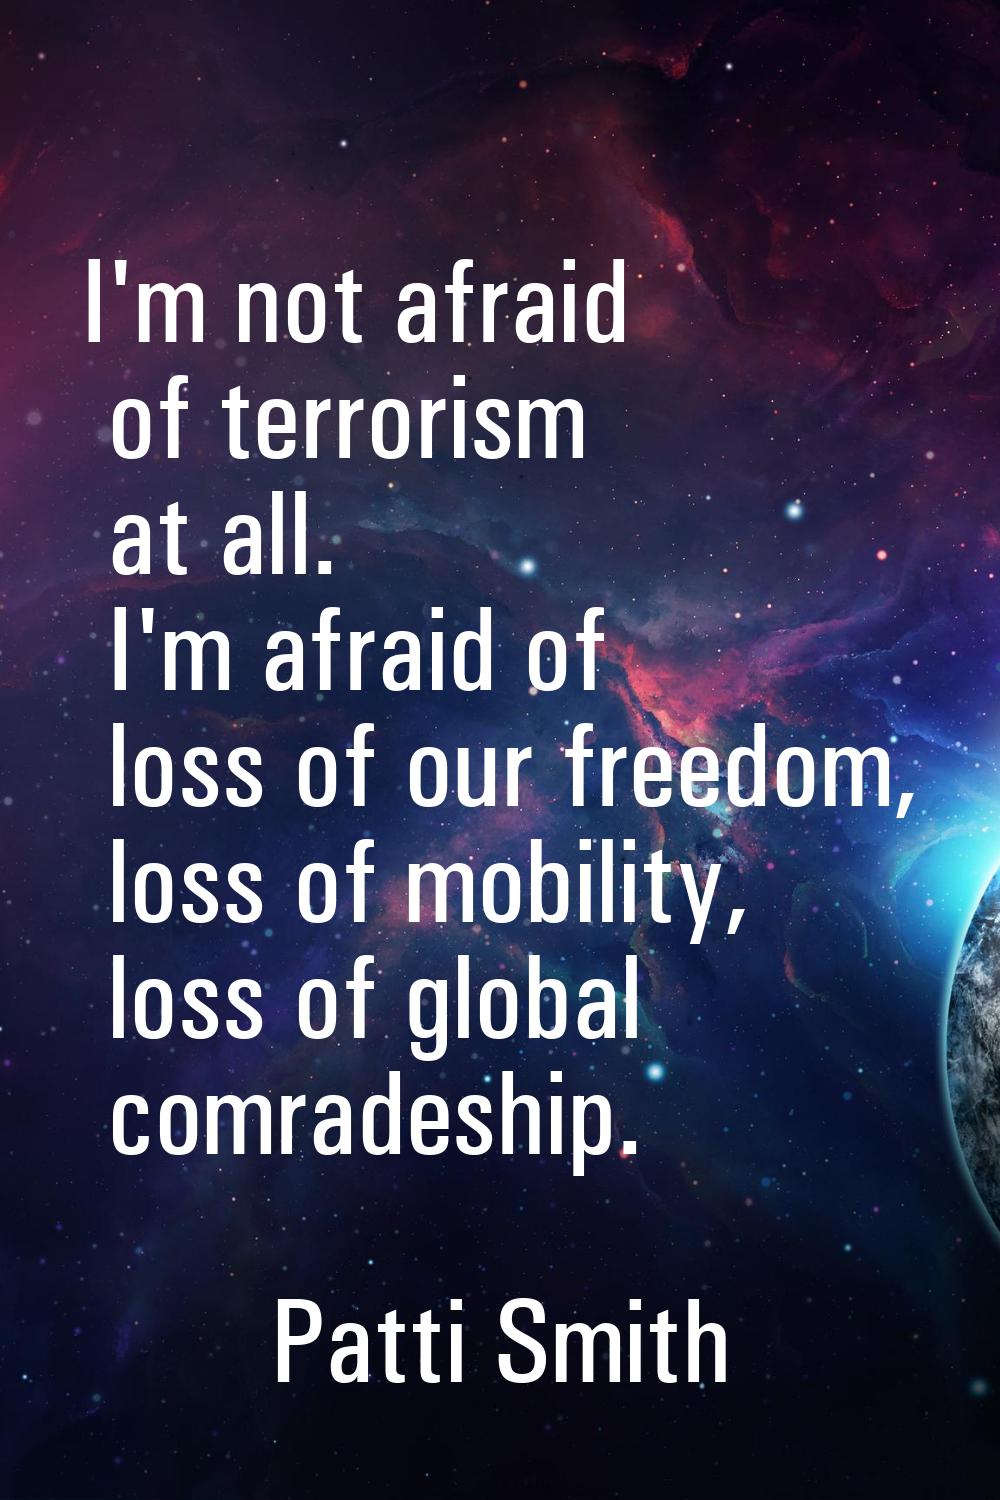 I'm not afraid of terrorism at all. I'm afraid of loss of our freedom, loss of mobility, loss of gl